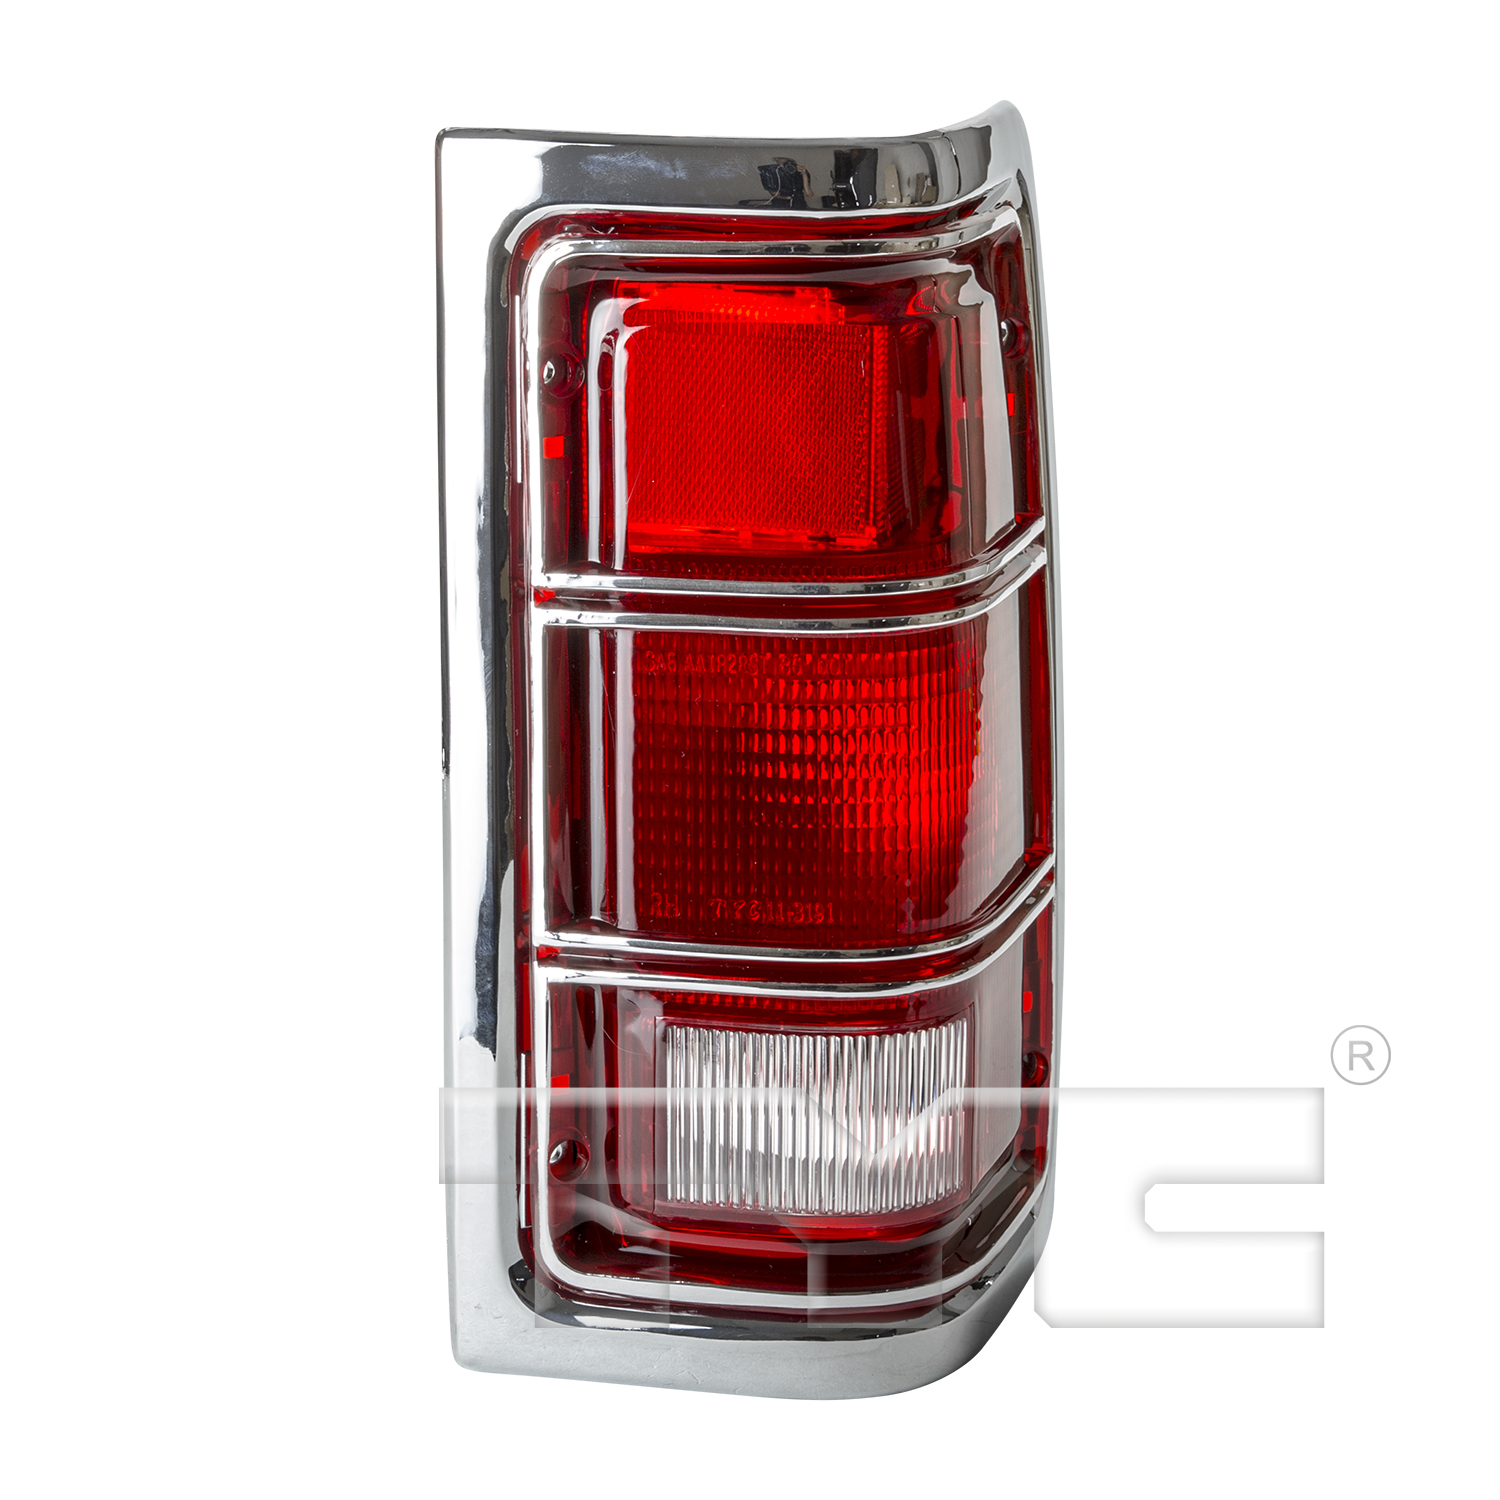 Aftermarket TAILLIGHTS for DODGE - D150, D150,81-87,RT Taillamp lens